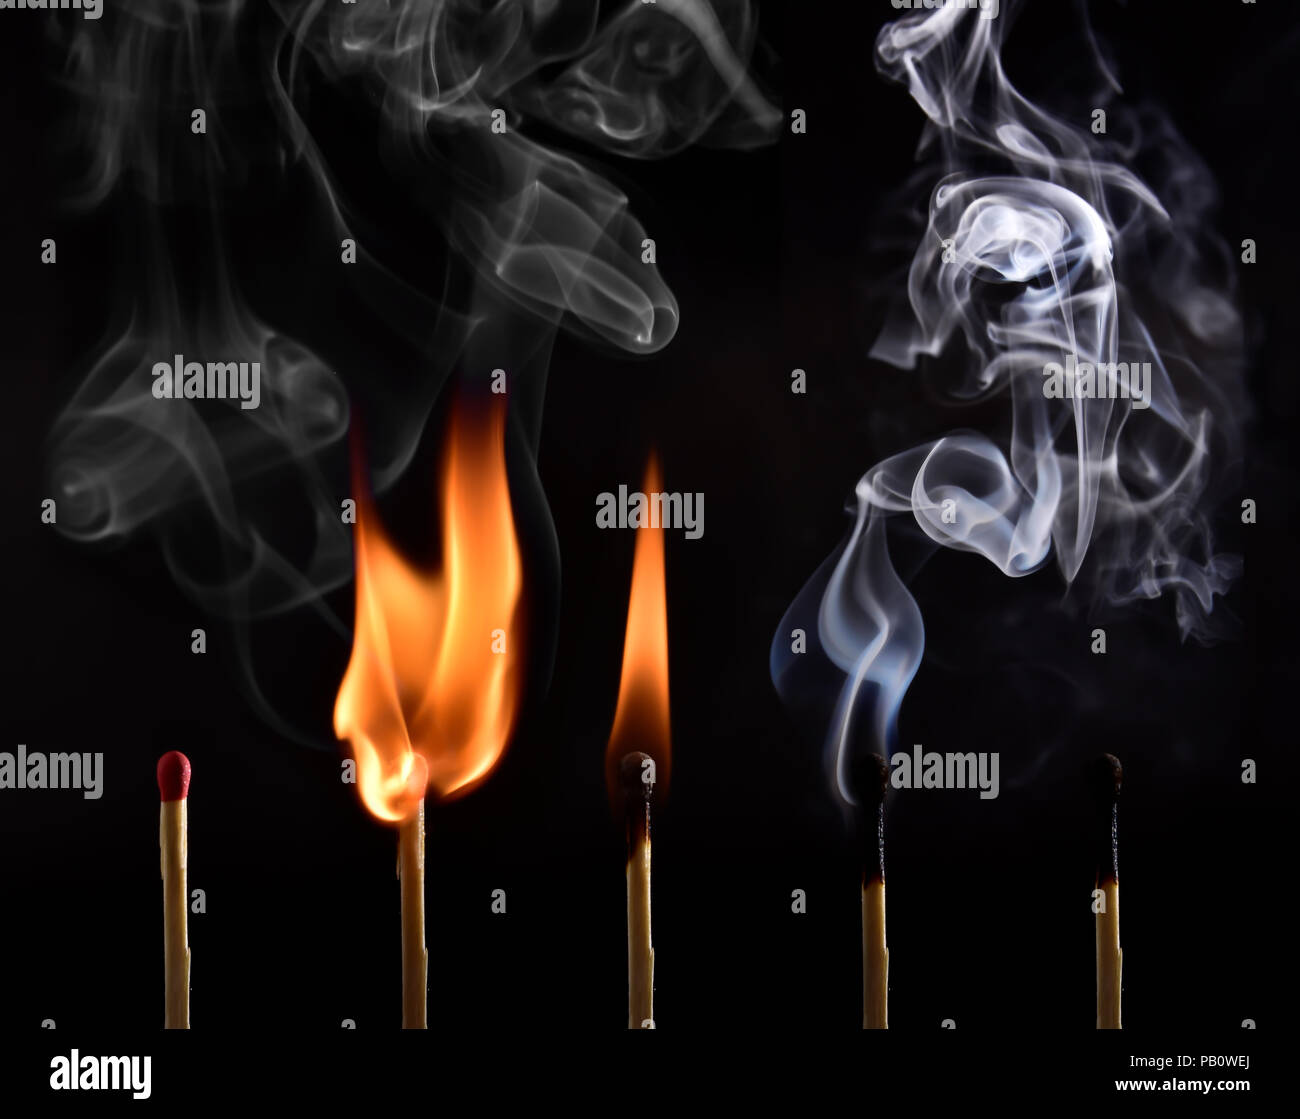 Sequence of ignition of a matchstick from lighting to being blown up and capturing the beautiful drawings made by the smoke. Done on black background Stock Photo